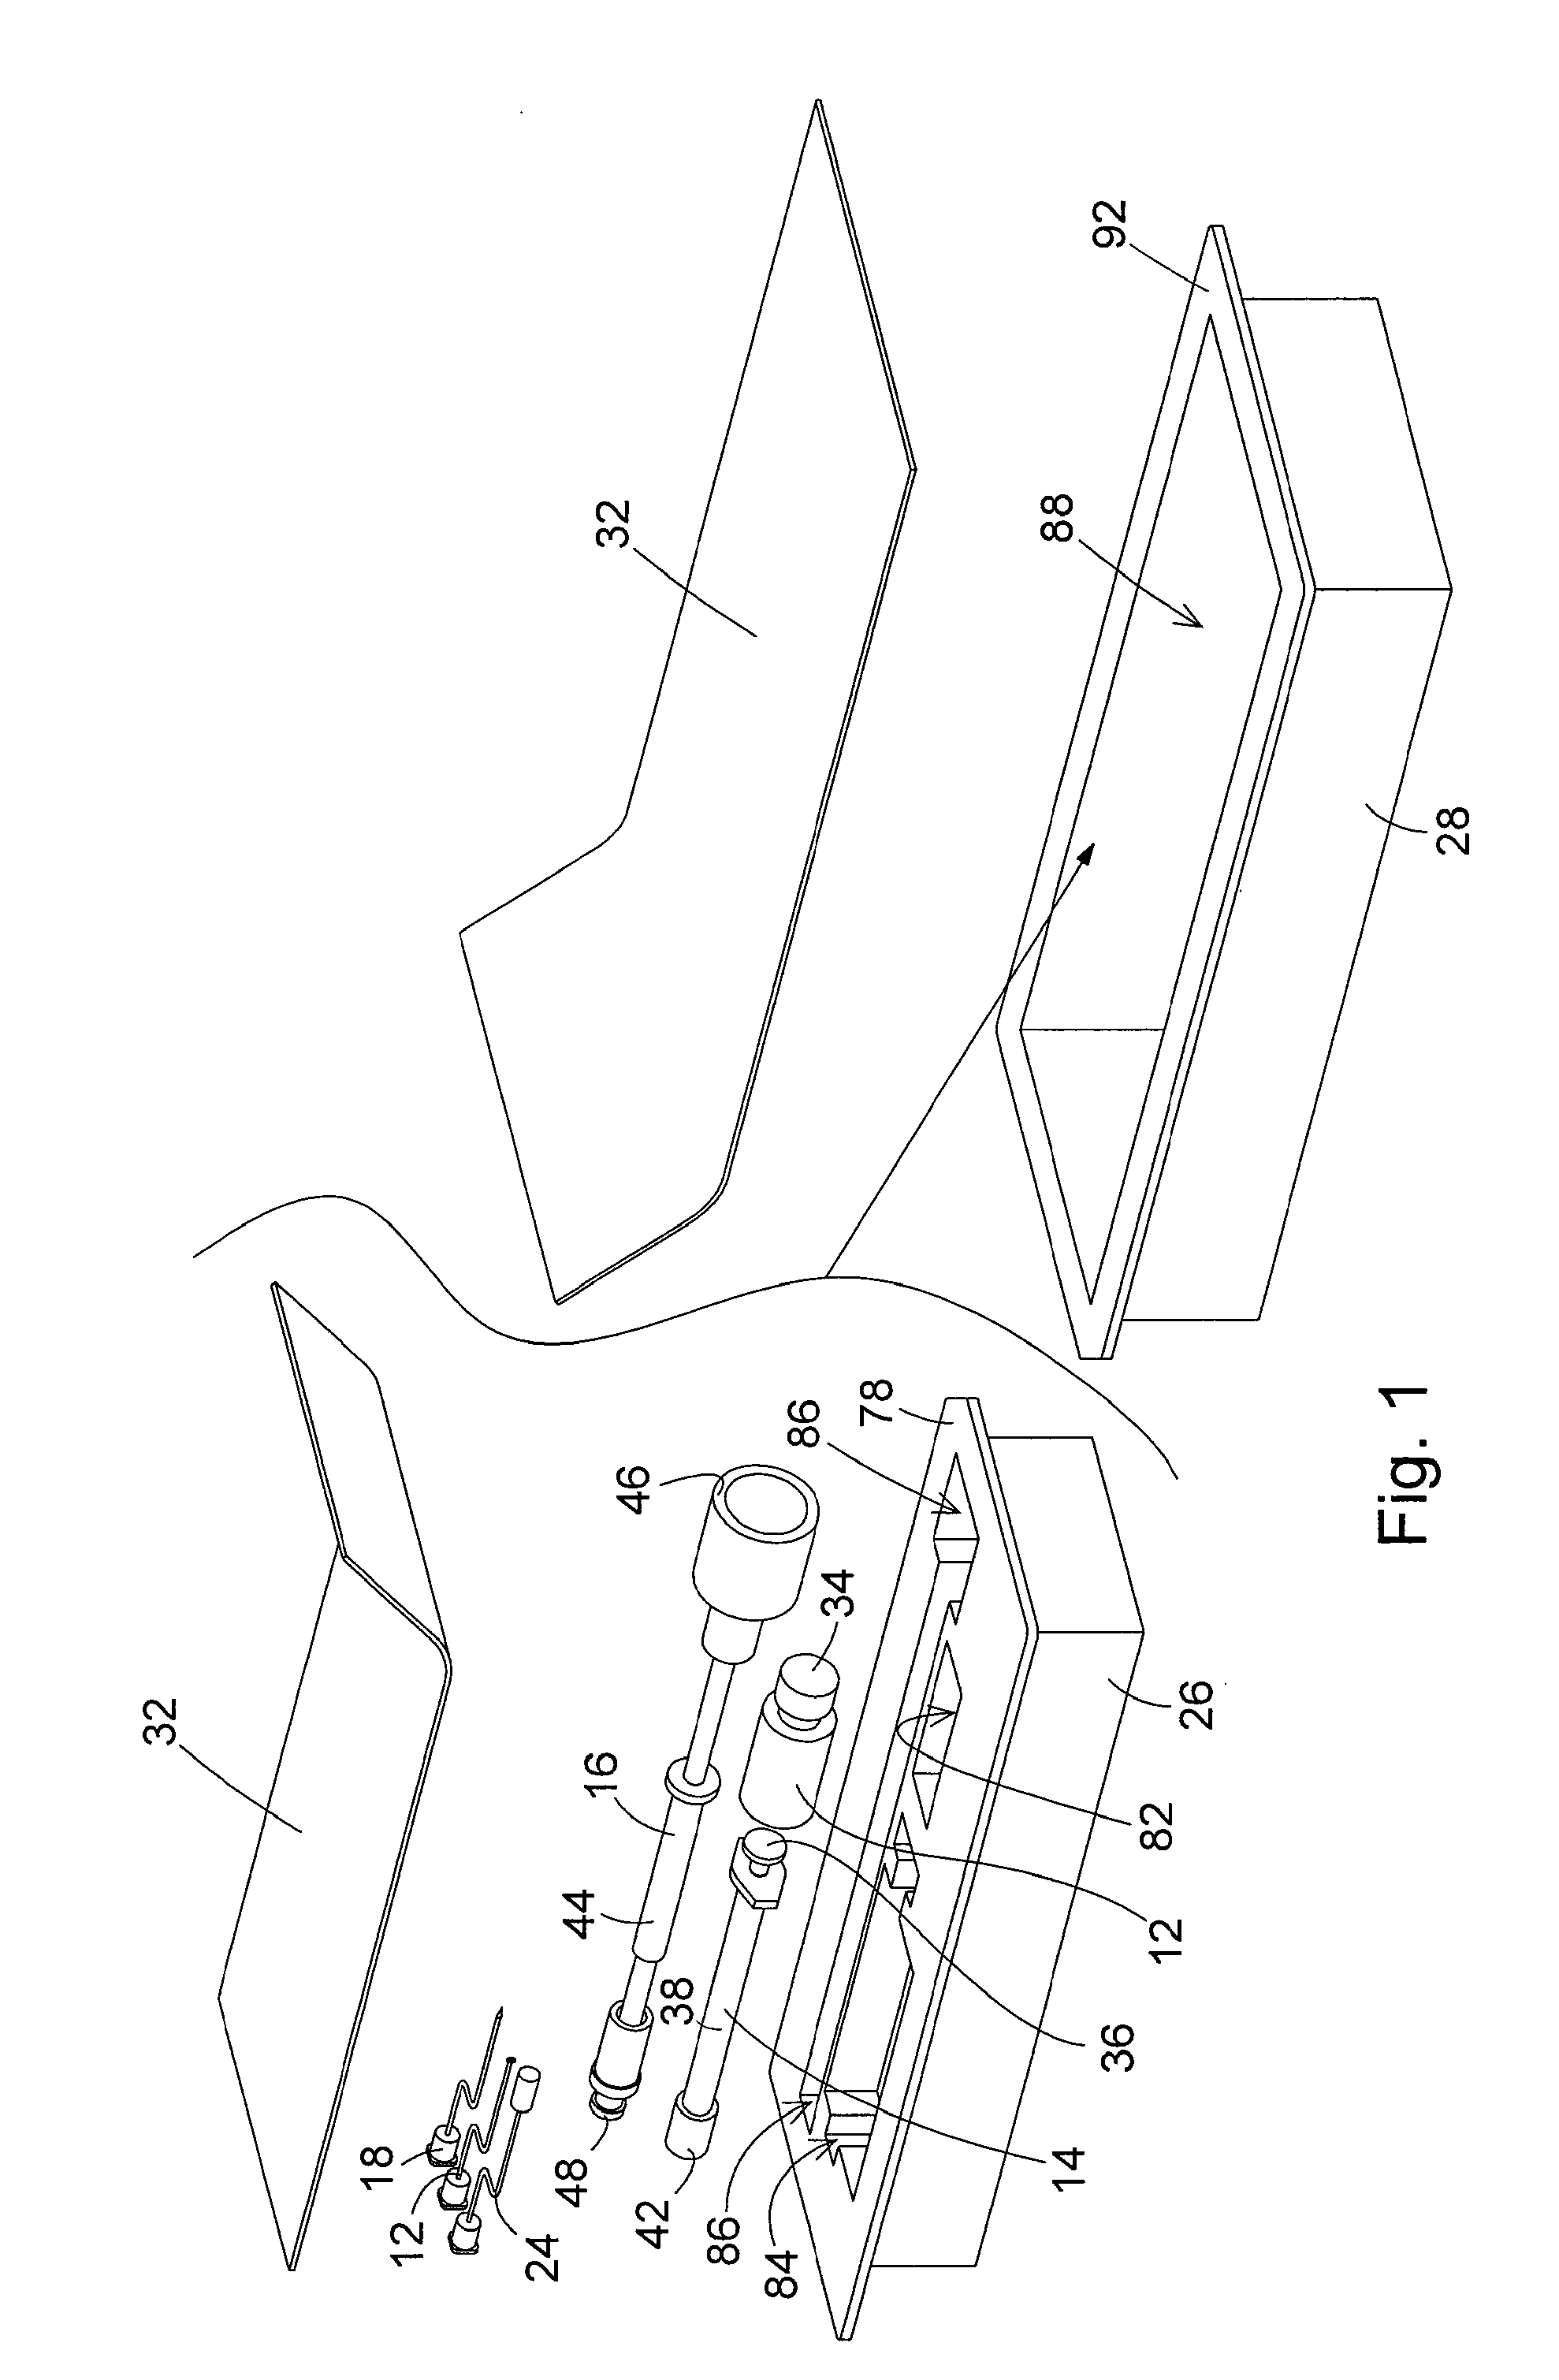 Apparatus and method for application of a pharmaceutical to the tympanic membrane for photodynamic laser myringotomy